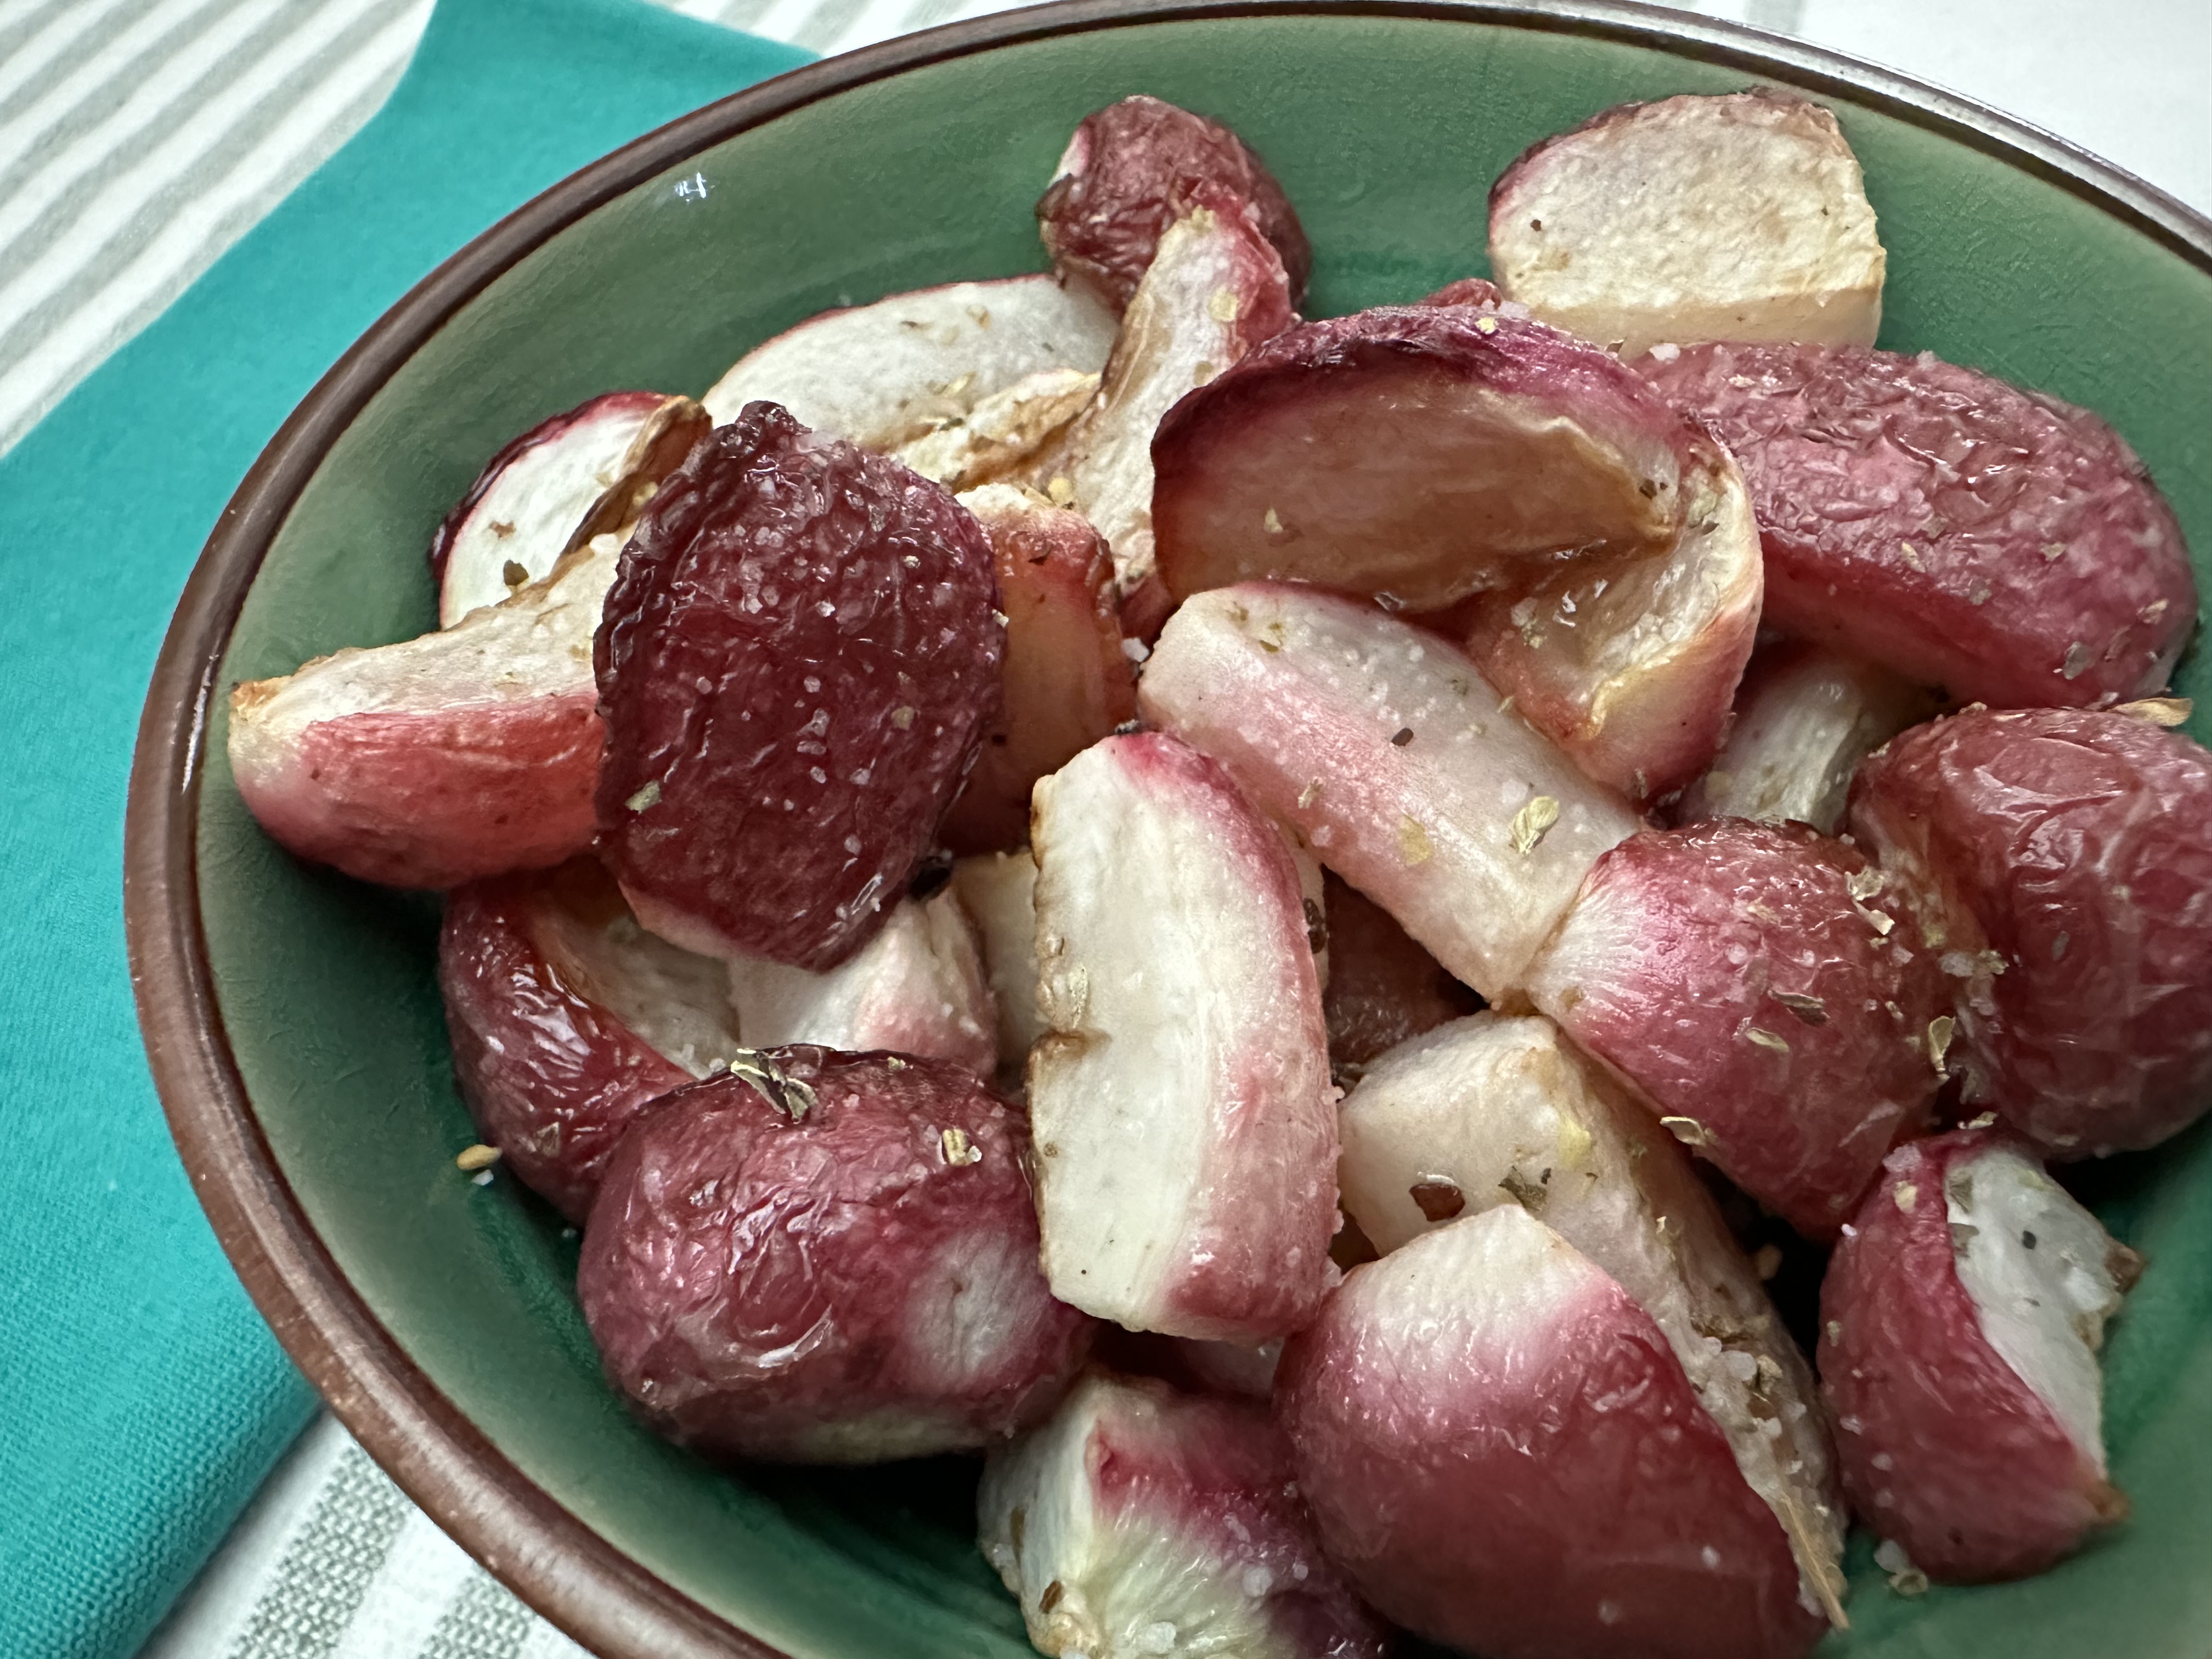 Oven roasted radishes in a bowl.